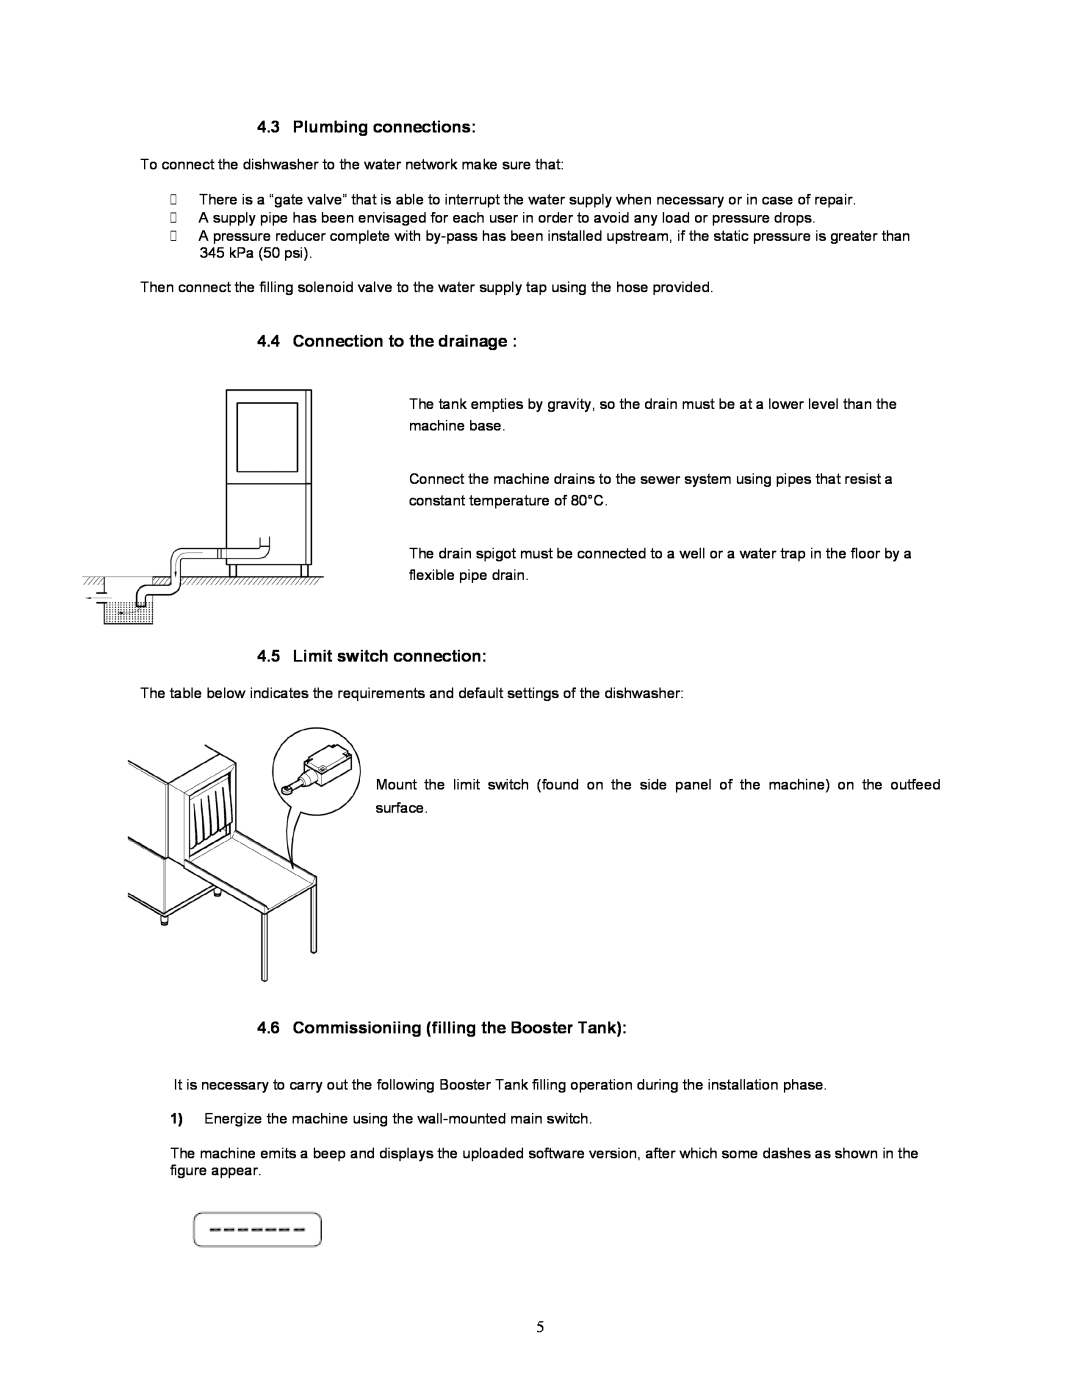 Jettech Metal Products FX-44 operation manual Plumbing connections, Connection to the drainage, Limit switch connection 